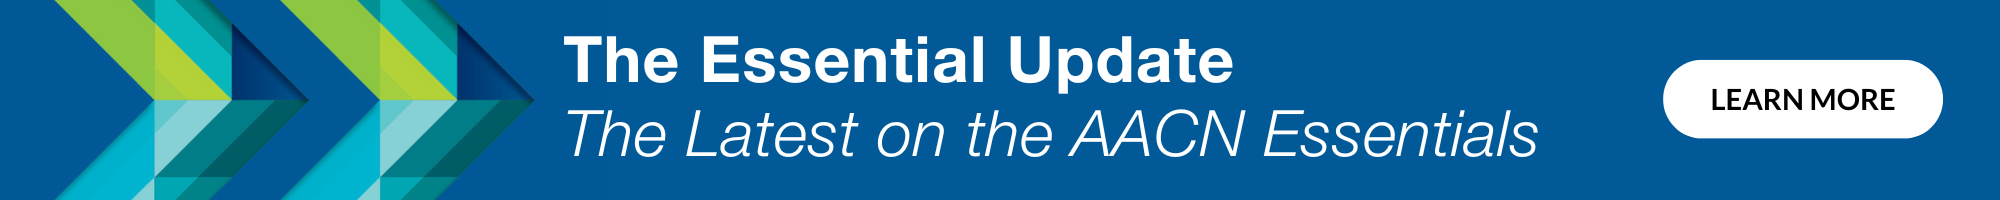 The Essentials Update: the Latest on the AACN Essentials. Click here to learn more.